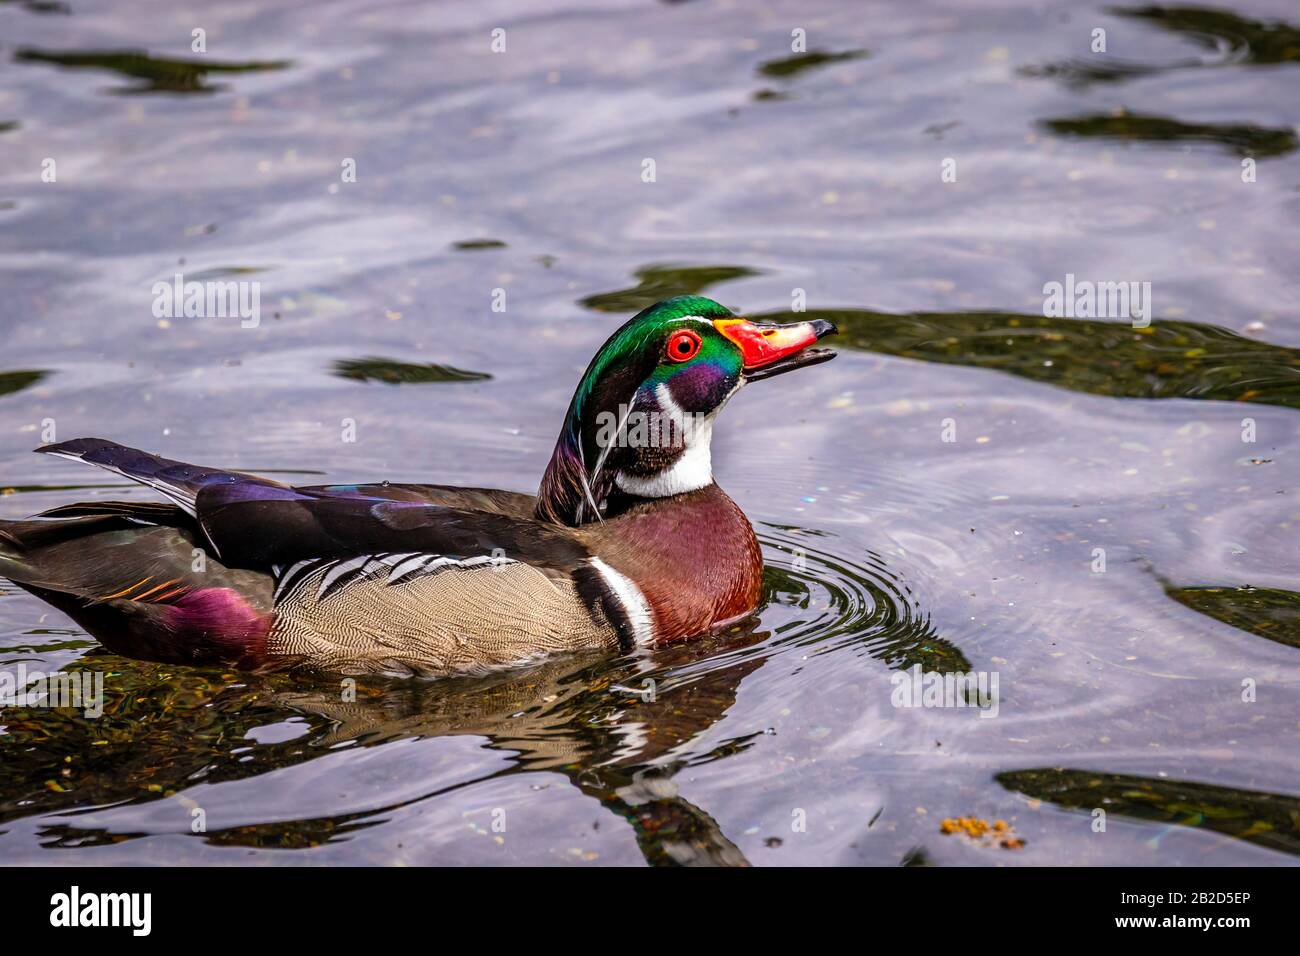 Male wood duck in water, with distinctive multicolored iridescent plumage and red eyes Stock Photo